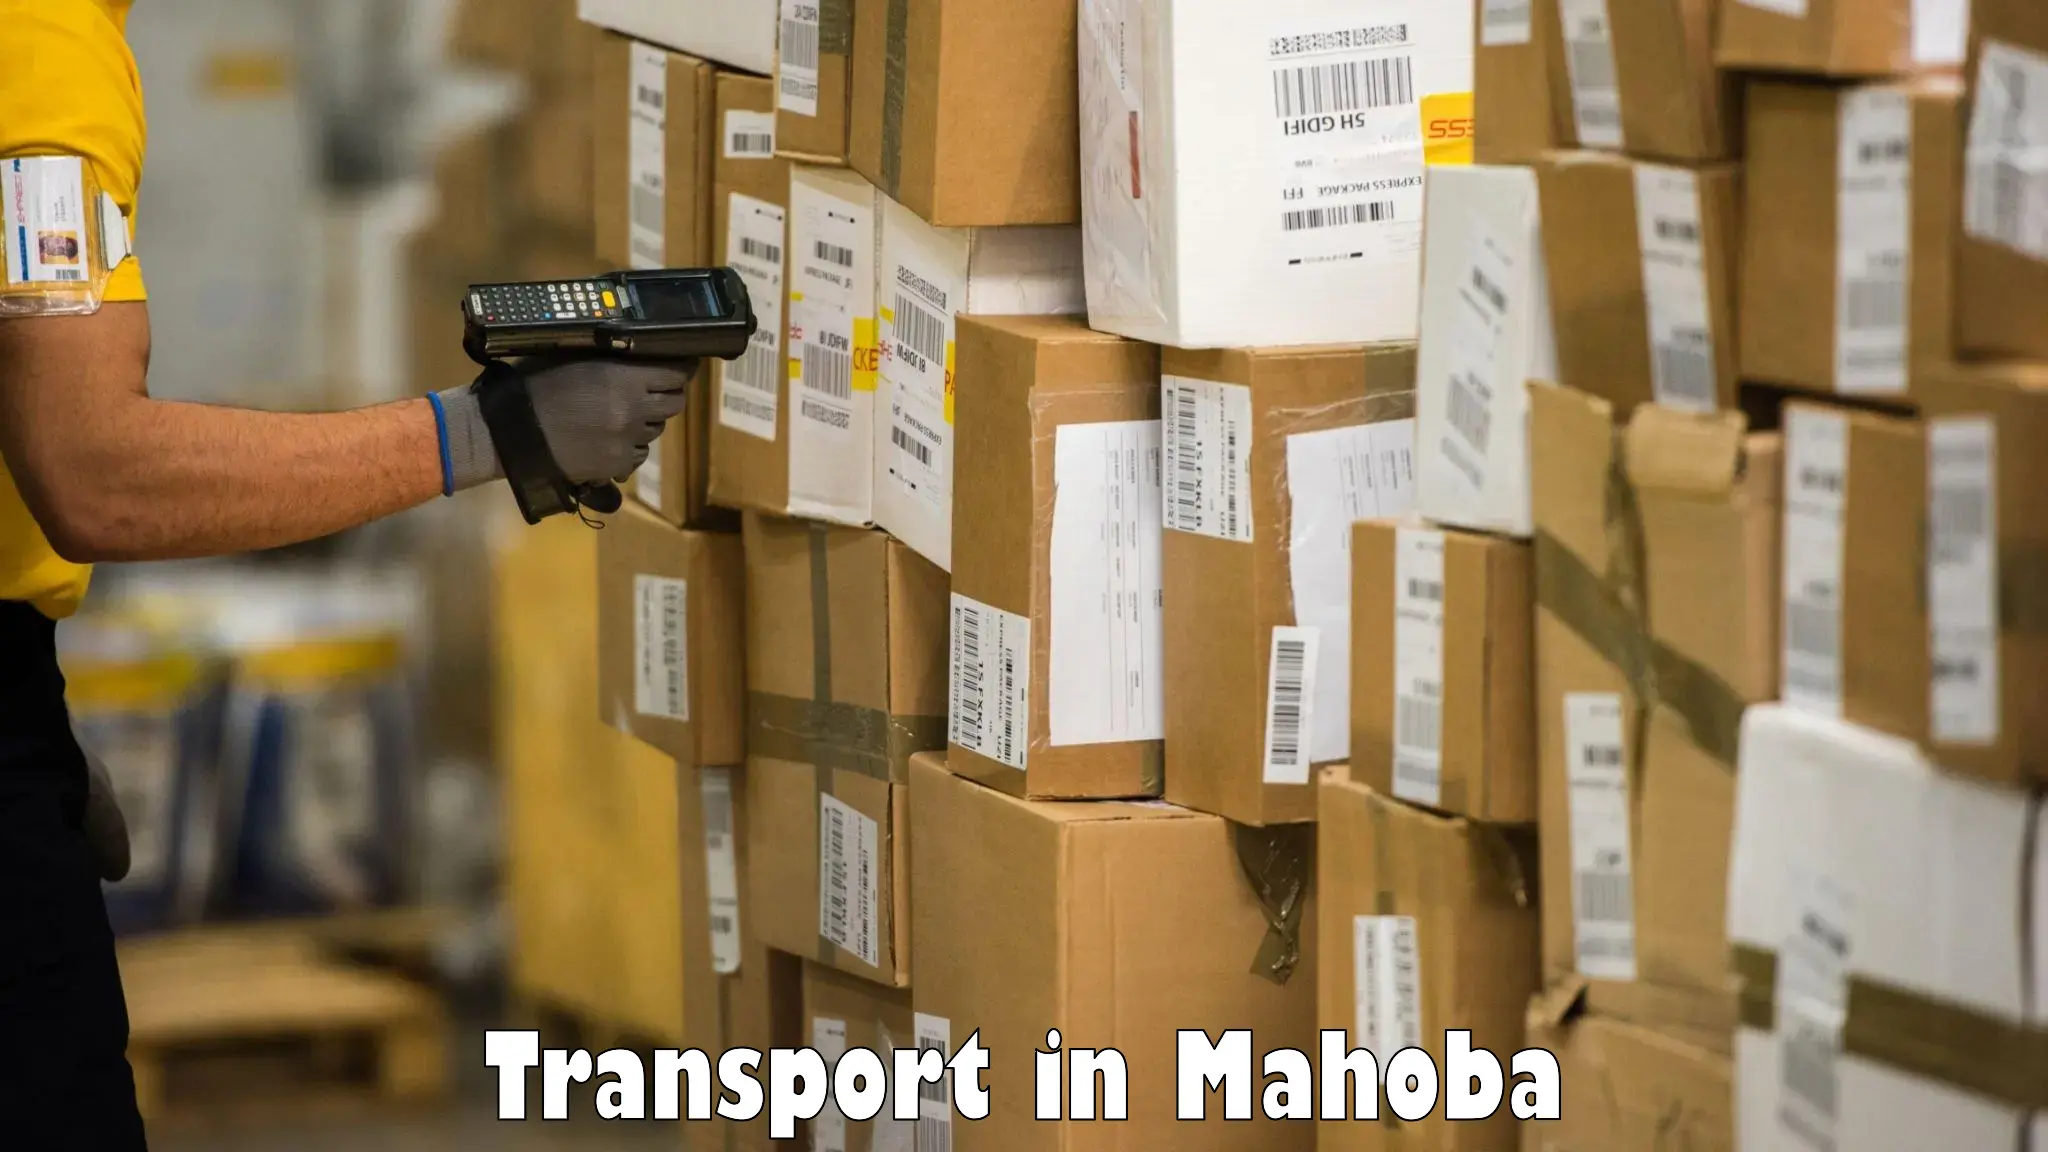 Cargo transport services in Mahoba